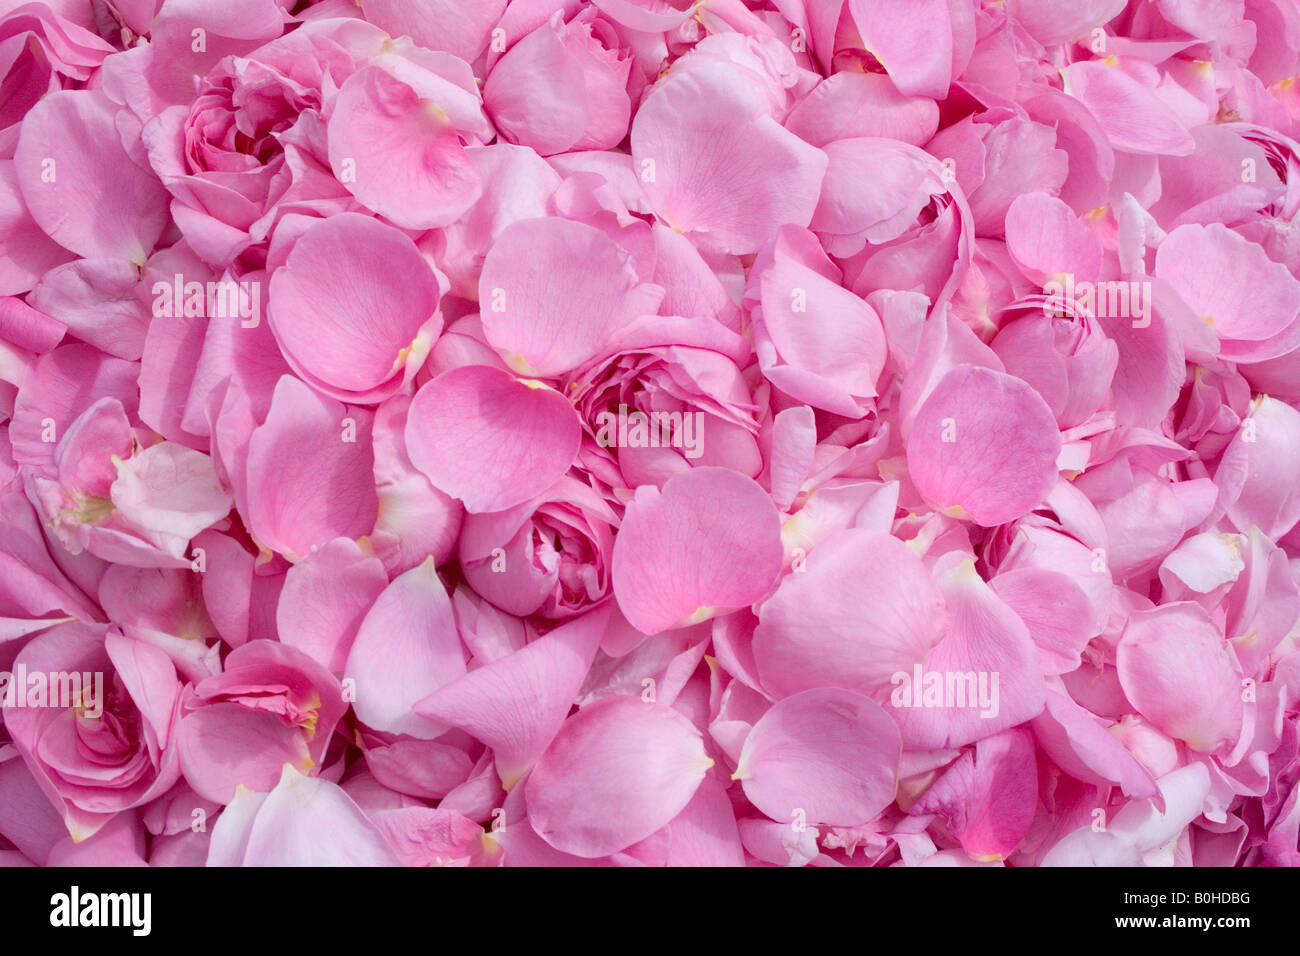 Pink Provence Rose or Cabbage Rose petals (Rosa x centifolia) gathered for medicinal use, Taubertal Valley, Germany Stock Photo